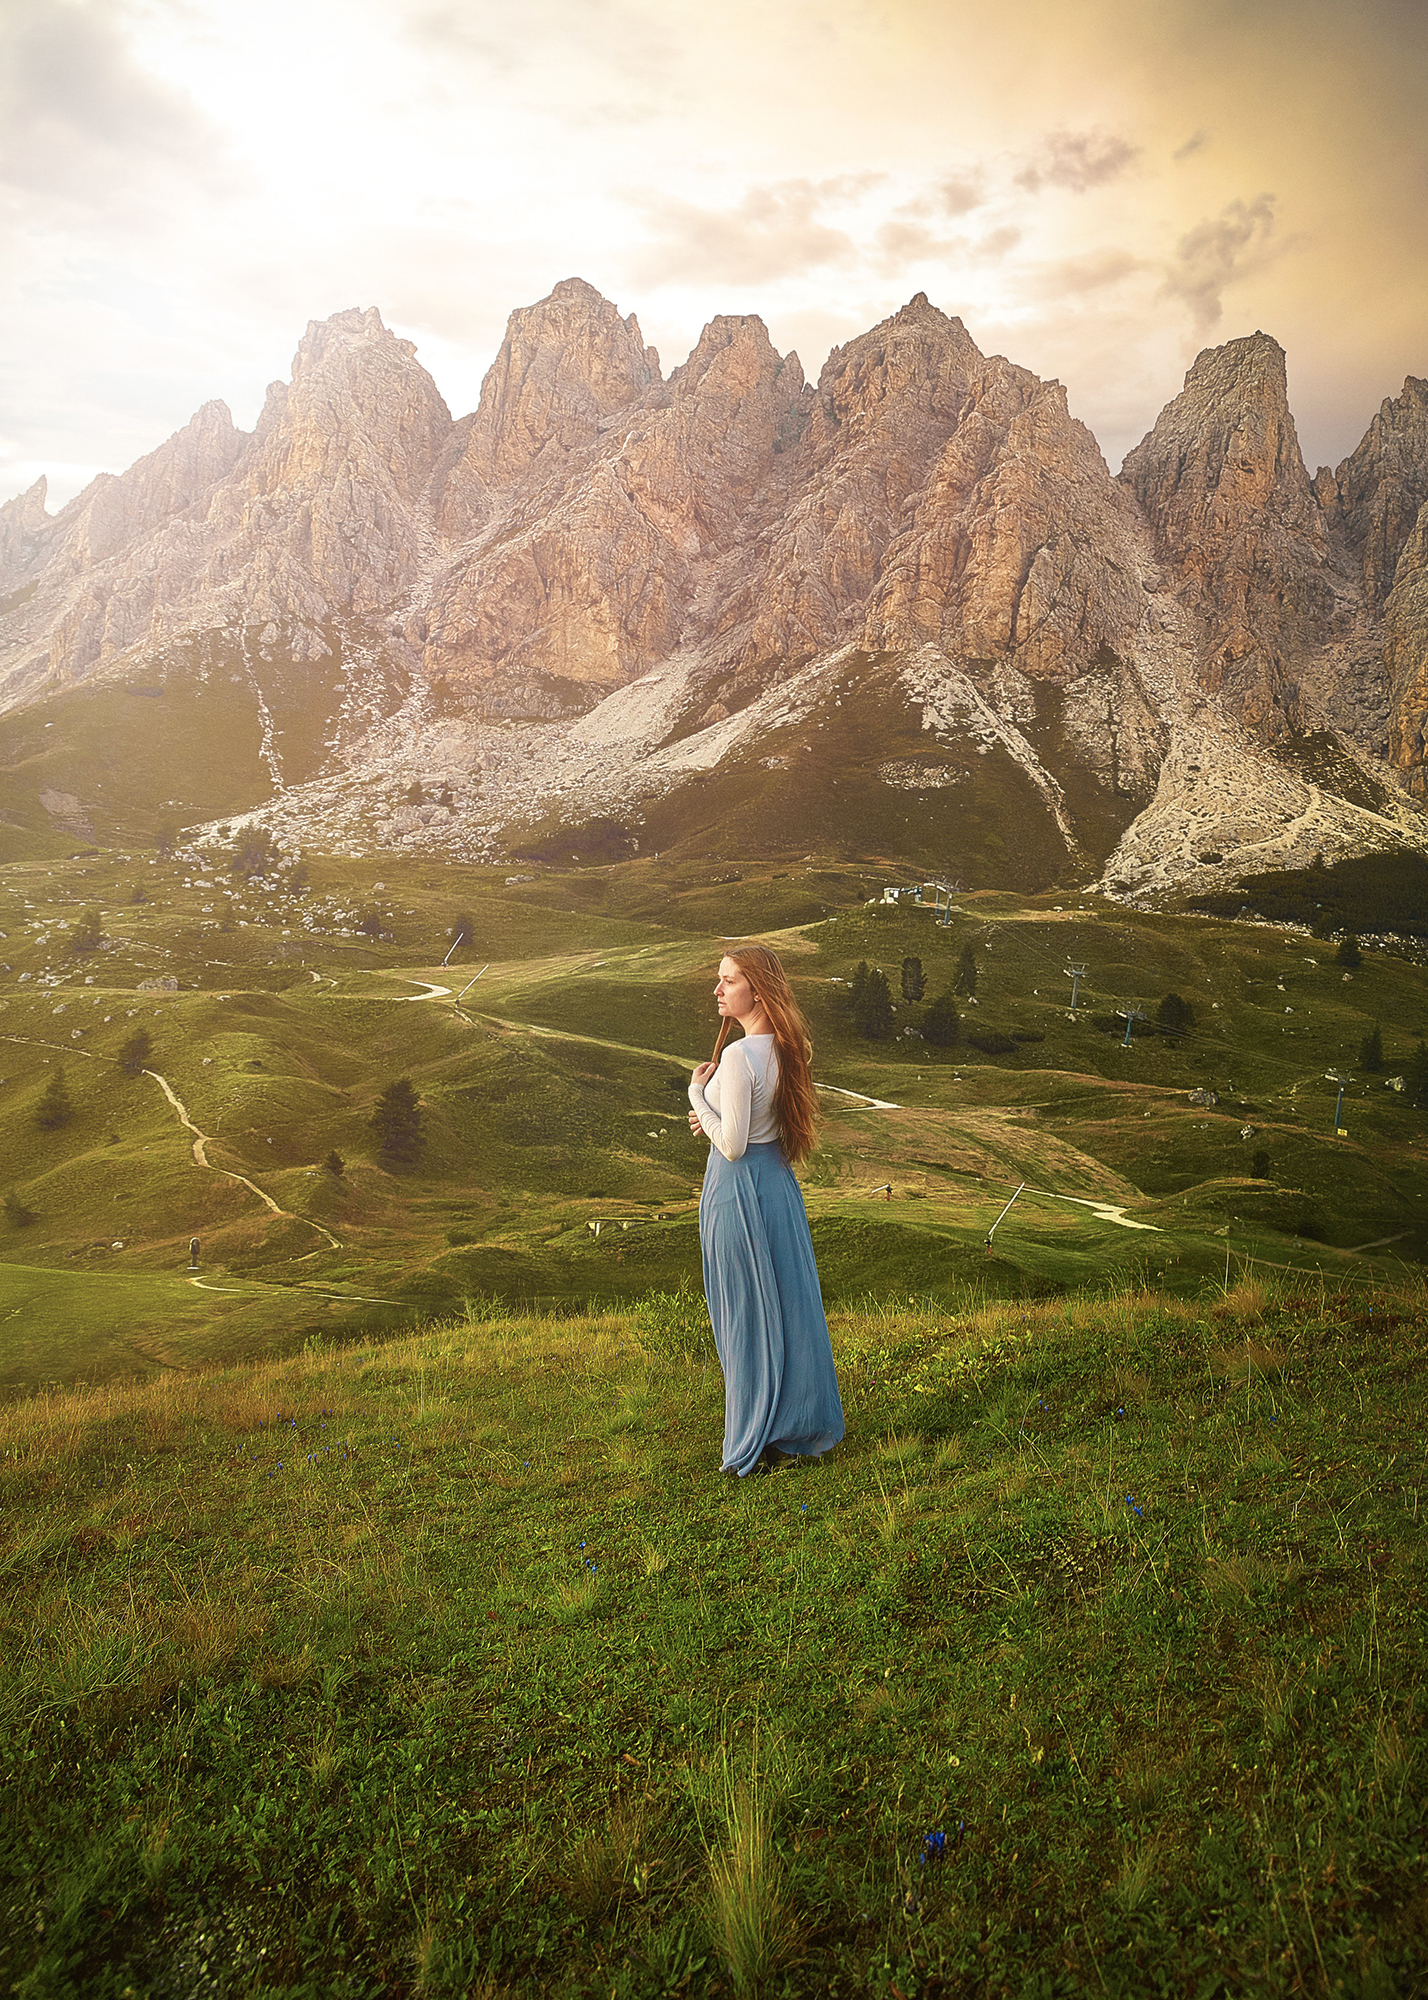 Woman in blue skirt standing in a field with the Dolomites in the background.